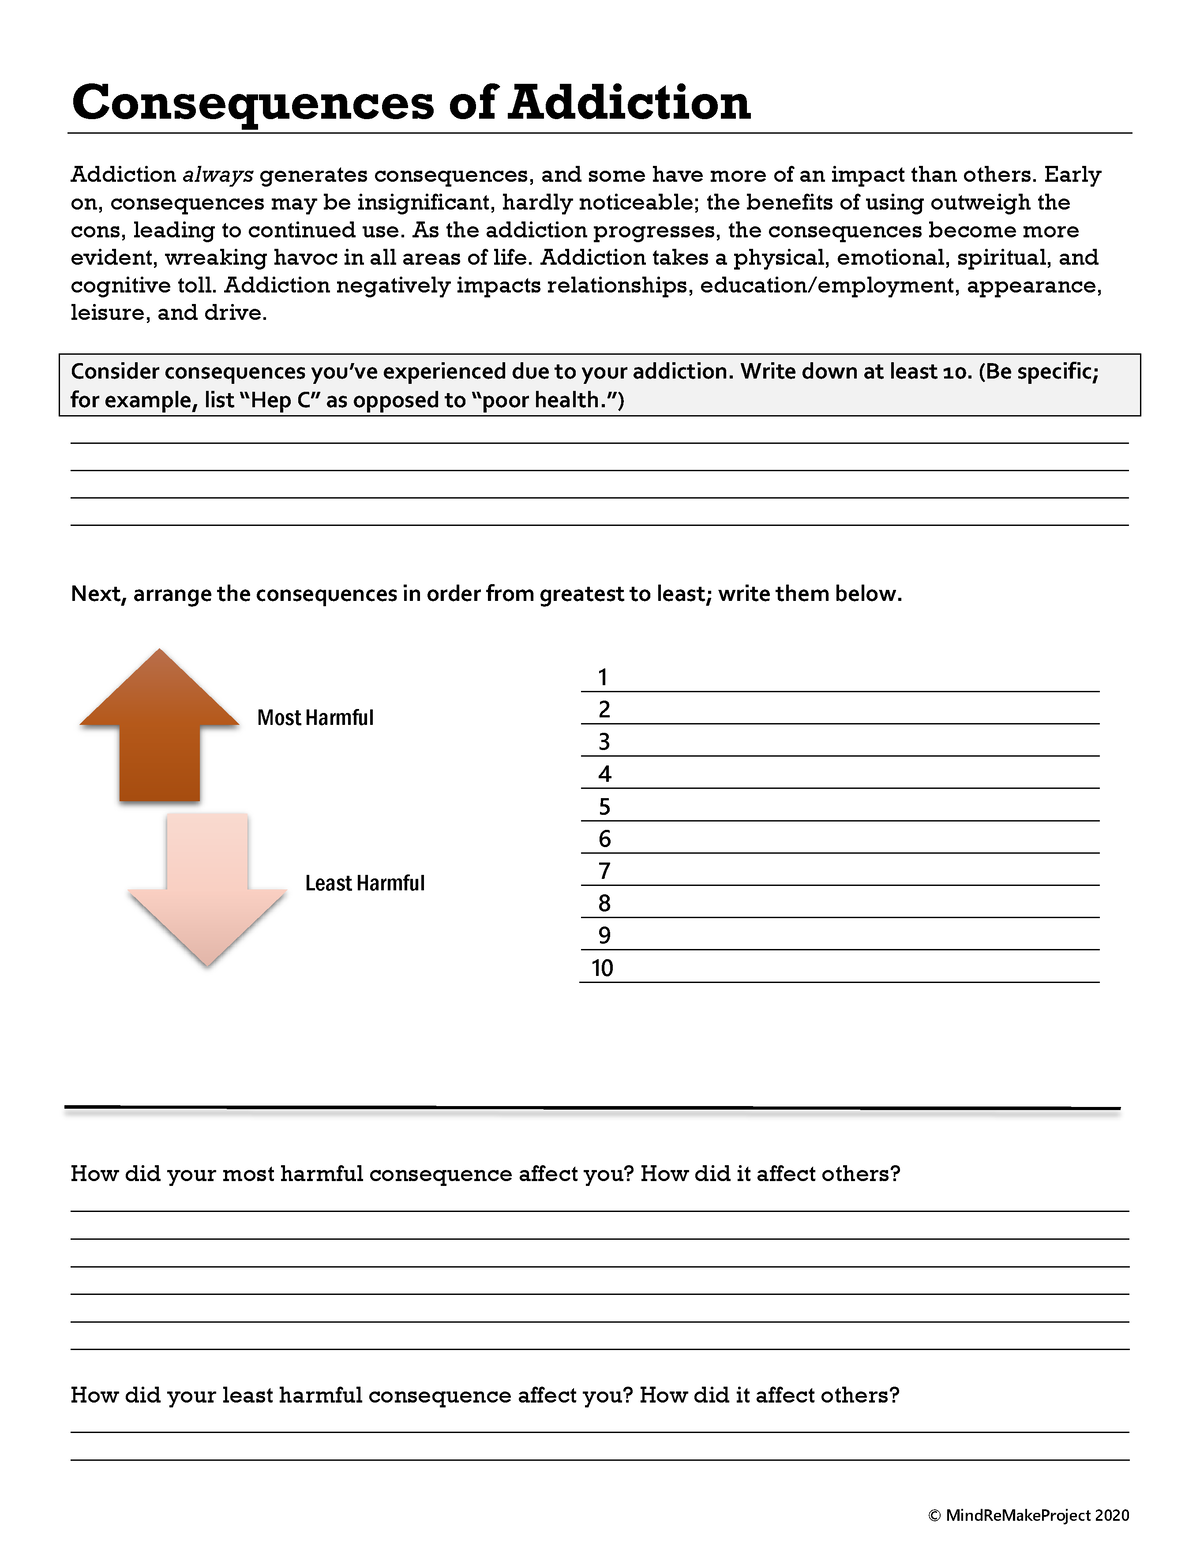 pros and cons of addiction worksheet